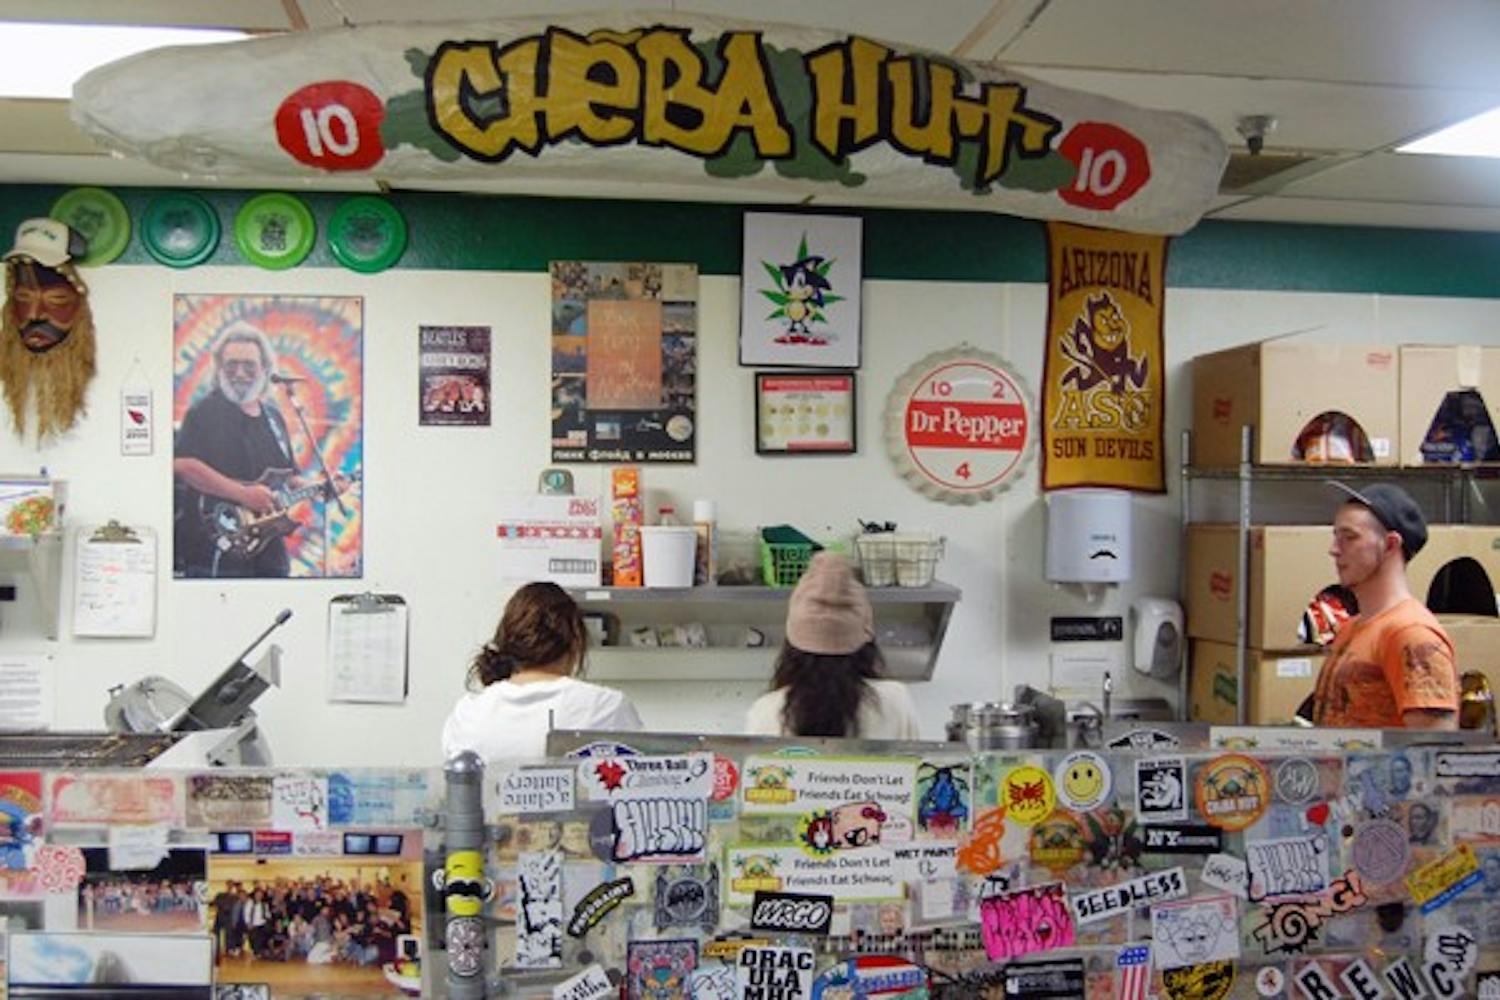 Tempe's "Marijuana friendly" Cheba Hut will prepare for their busiest time of the year on Apr. 20th and expect to increase their sandwich sales for the 4/20 holiday. (Photo by Thania A. Betancourt)